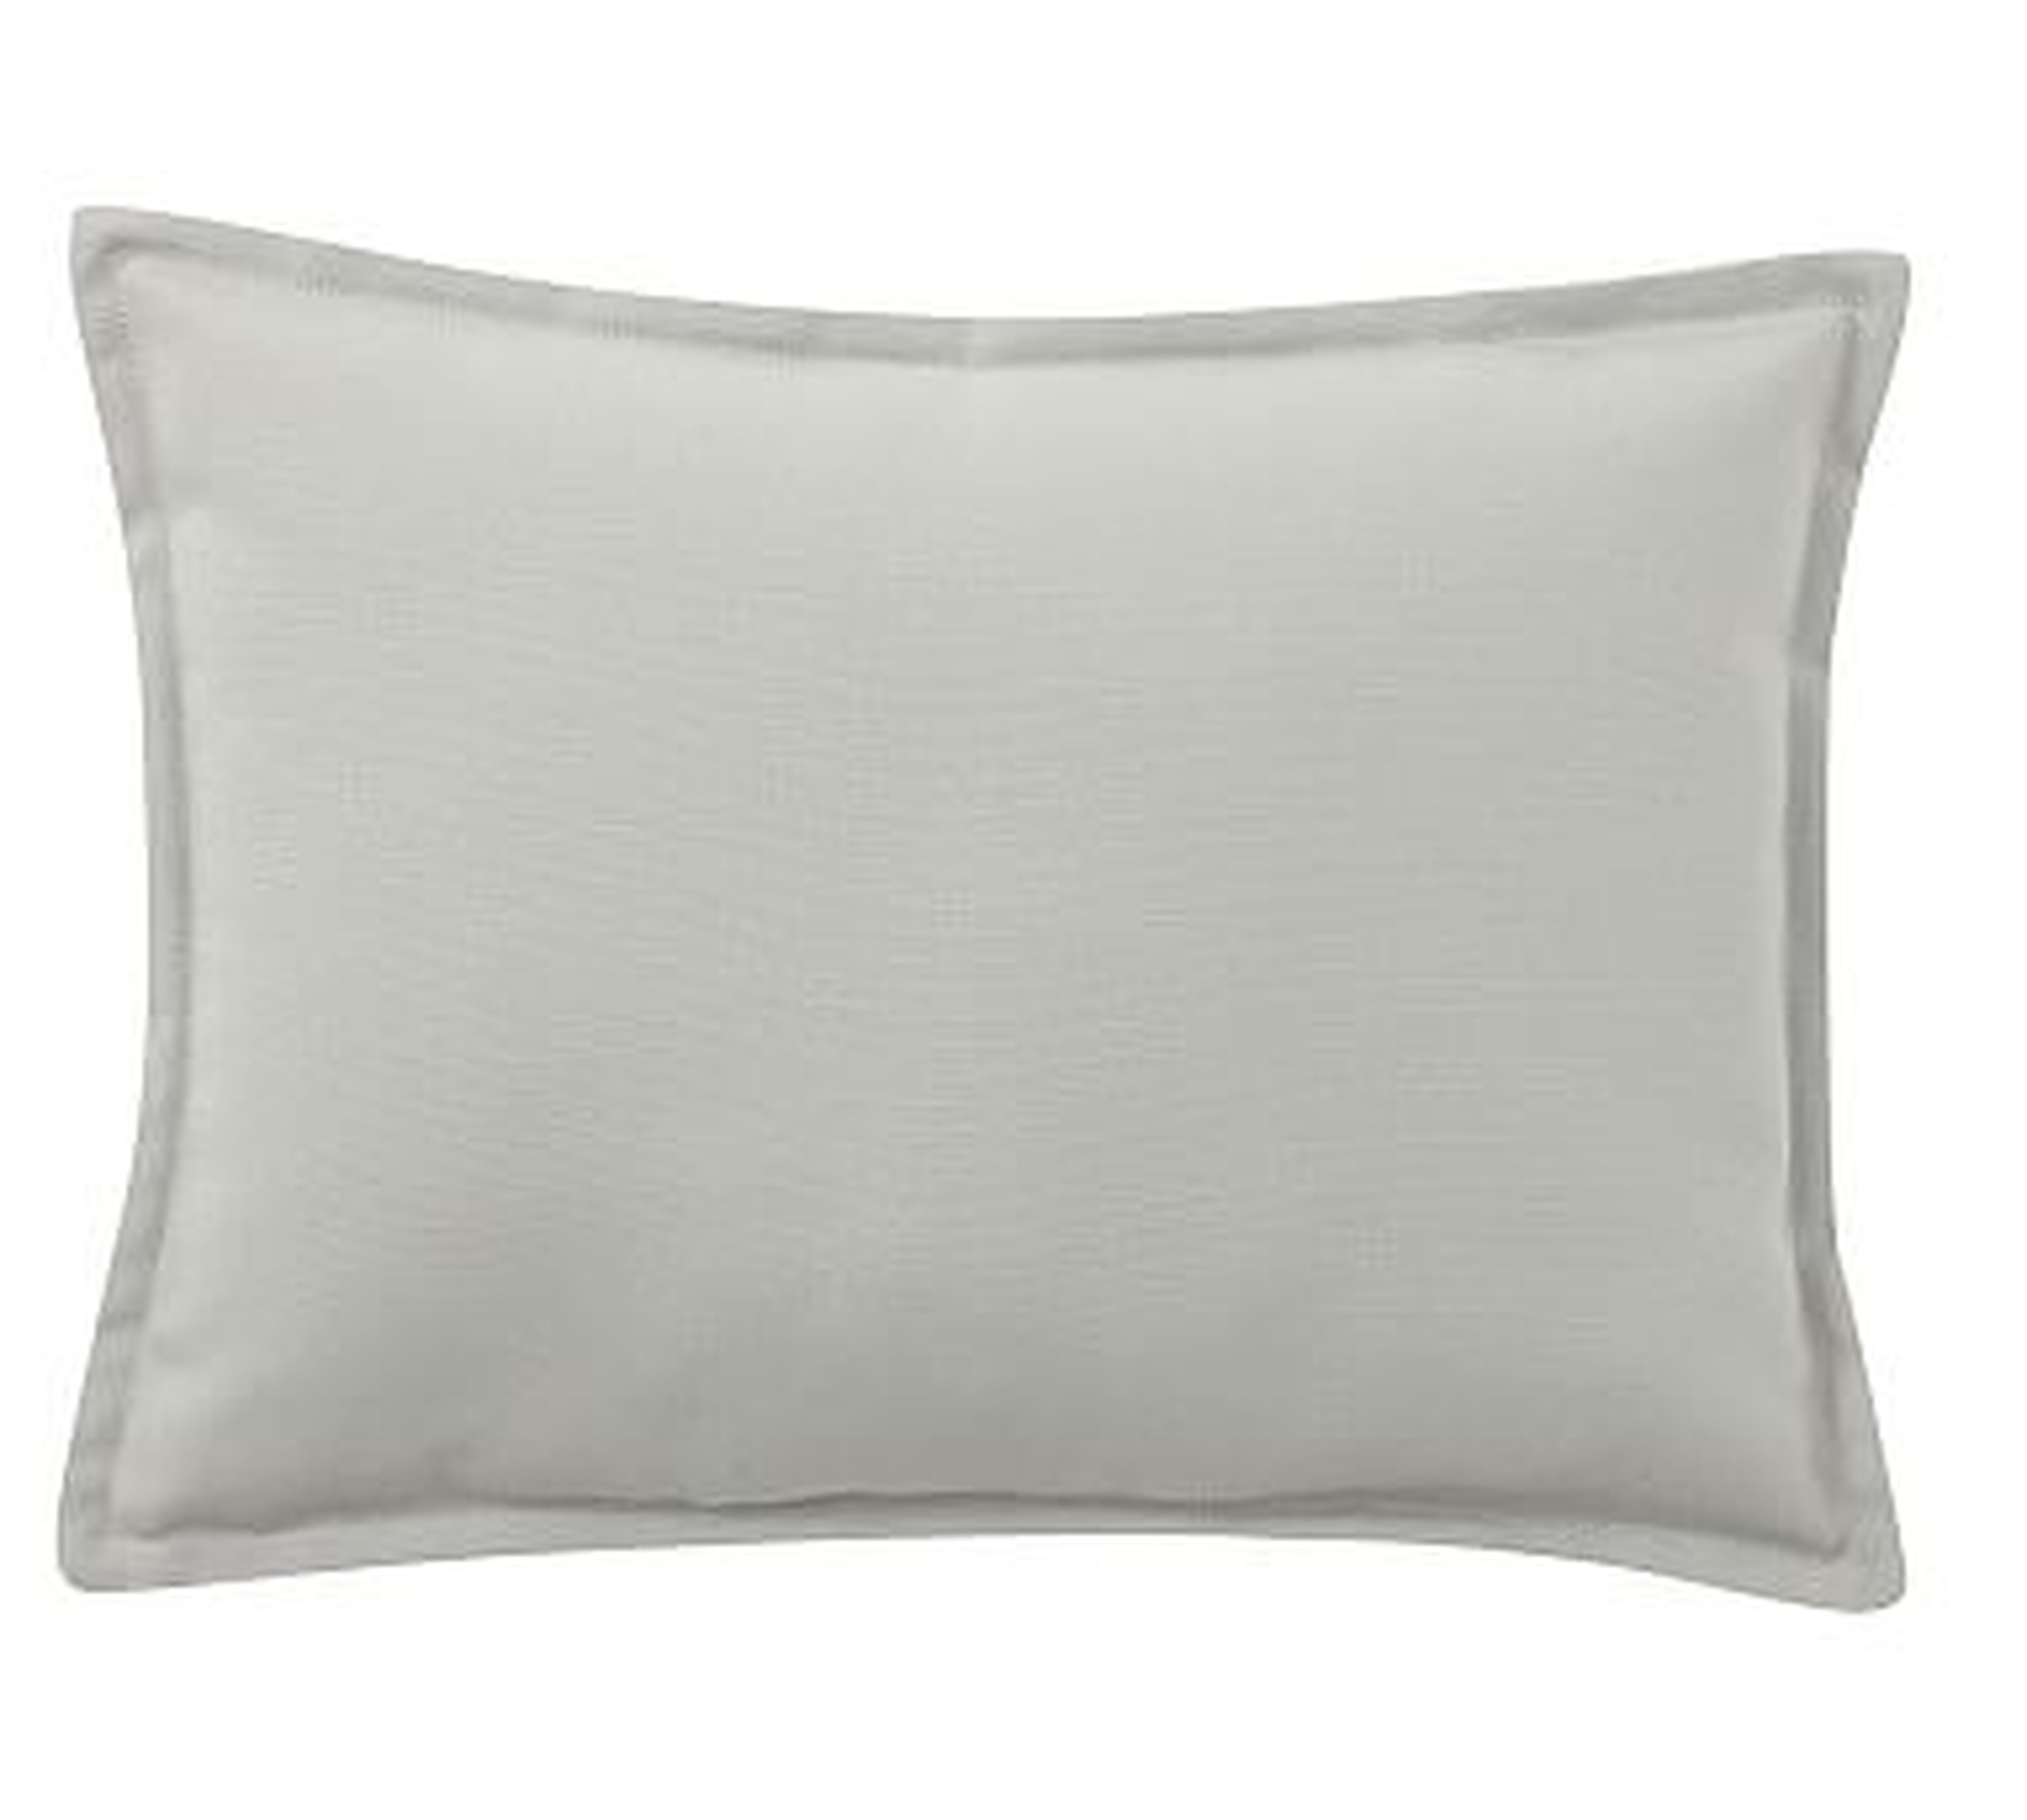 PB Classic Indoor/Outdoor Solid Mini Lumbar Pillow, 12x16", Gray Drizzle - Pottery Barn